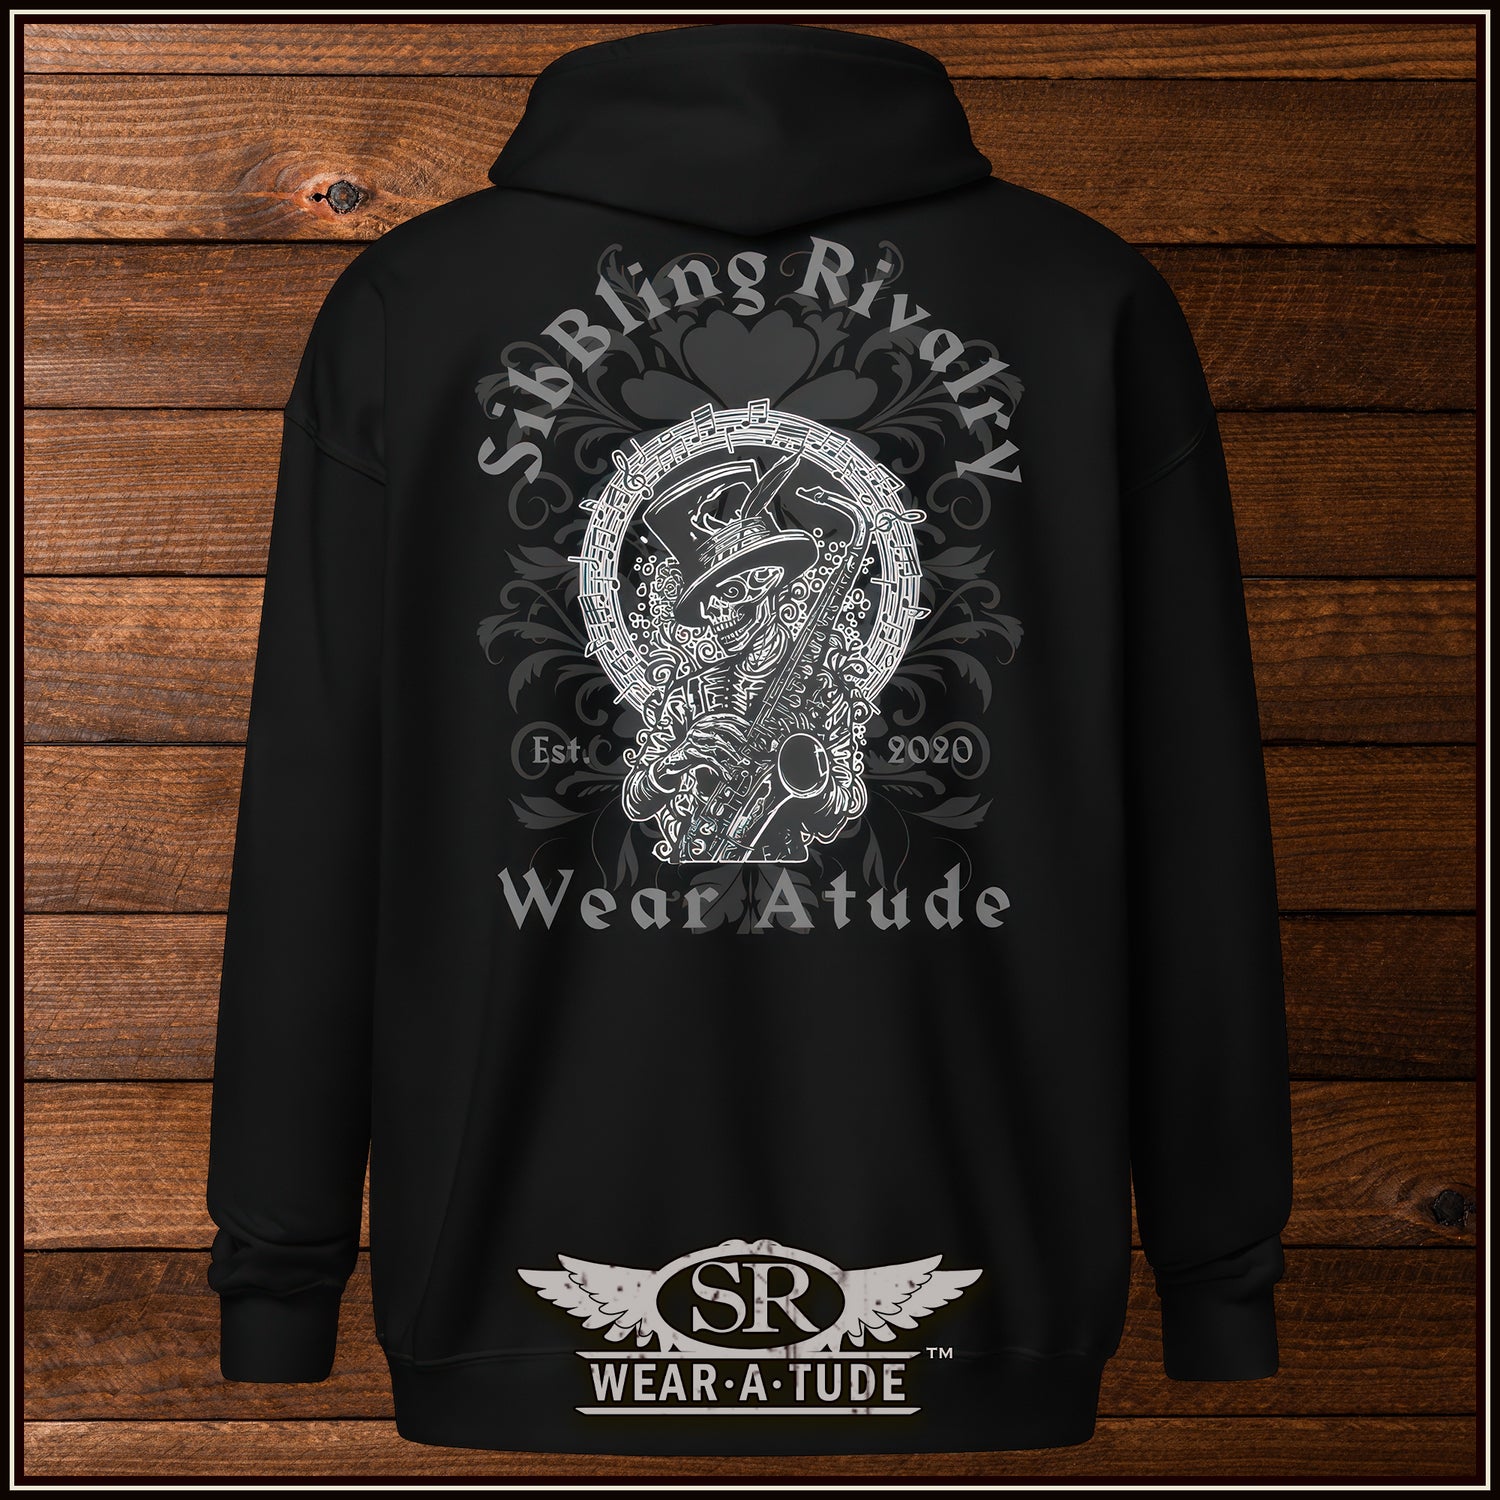 The SR Wear Atude Ryder Hoodie has that perfect rough biker patch look. The hoodie Is a soft oversized feel and perfect to wear over other clothing for that layered look. This great Black on black design of the Saxophone Skeleton will become part of your everyday outerwear.  